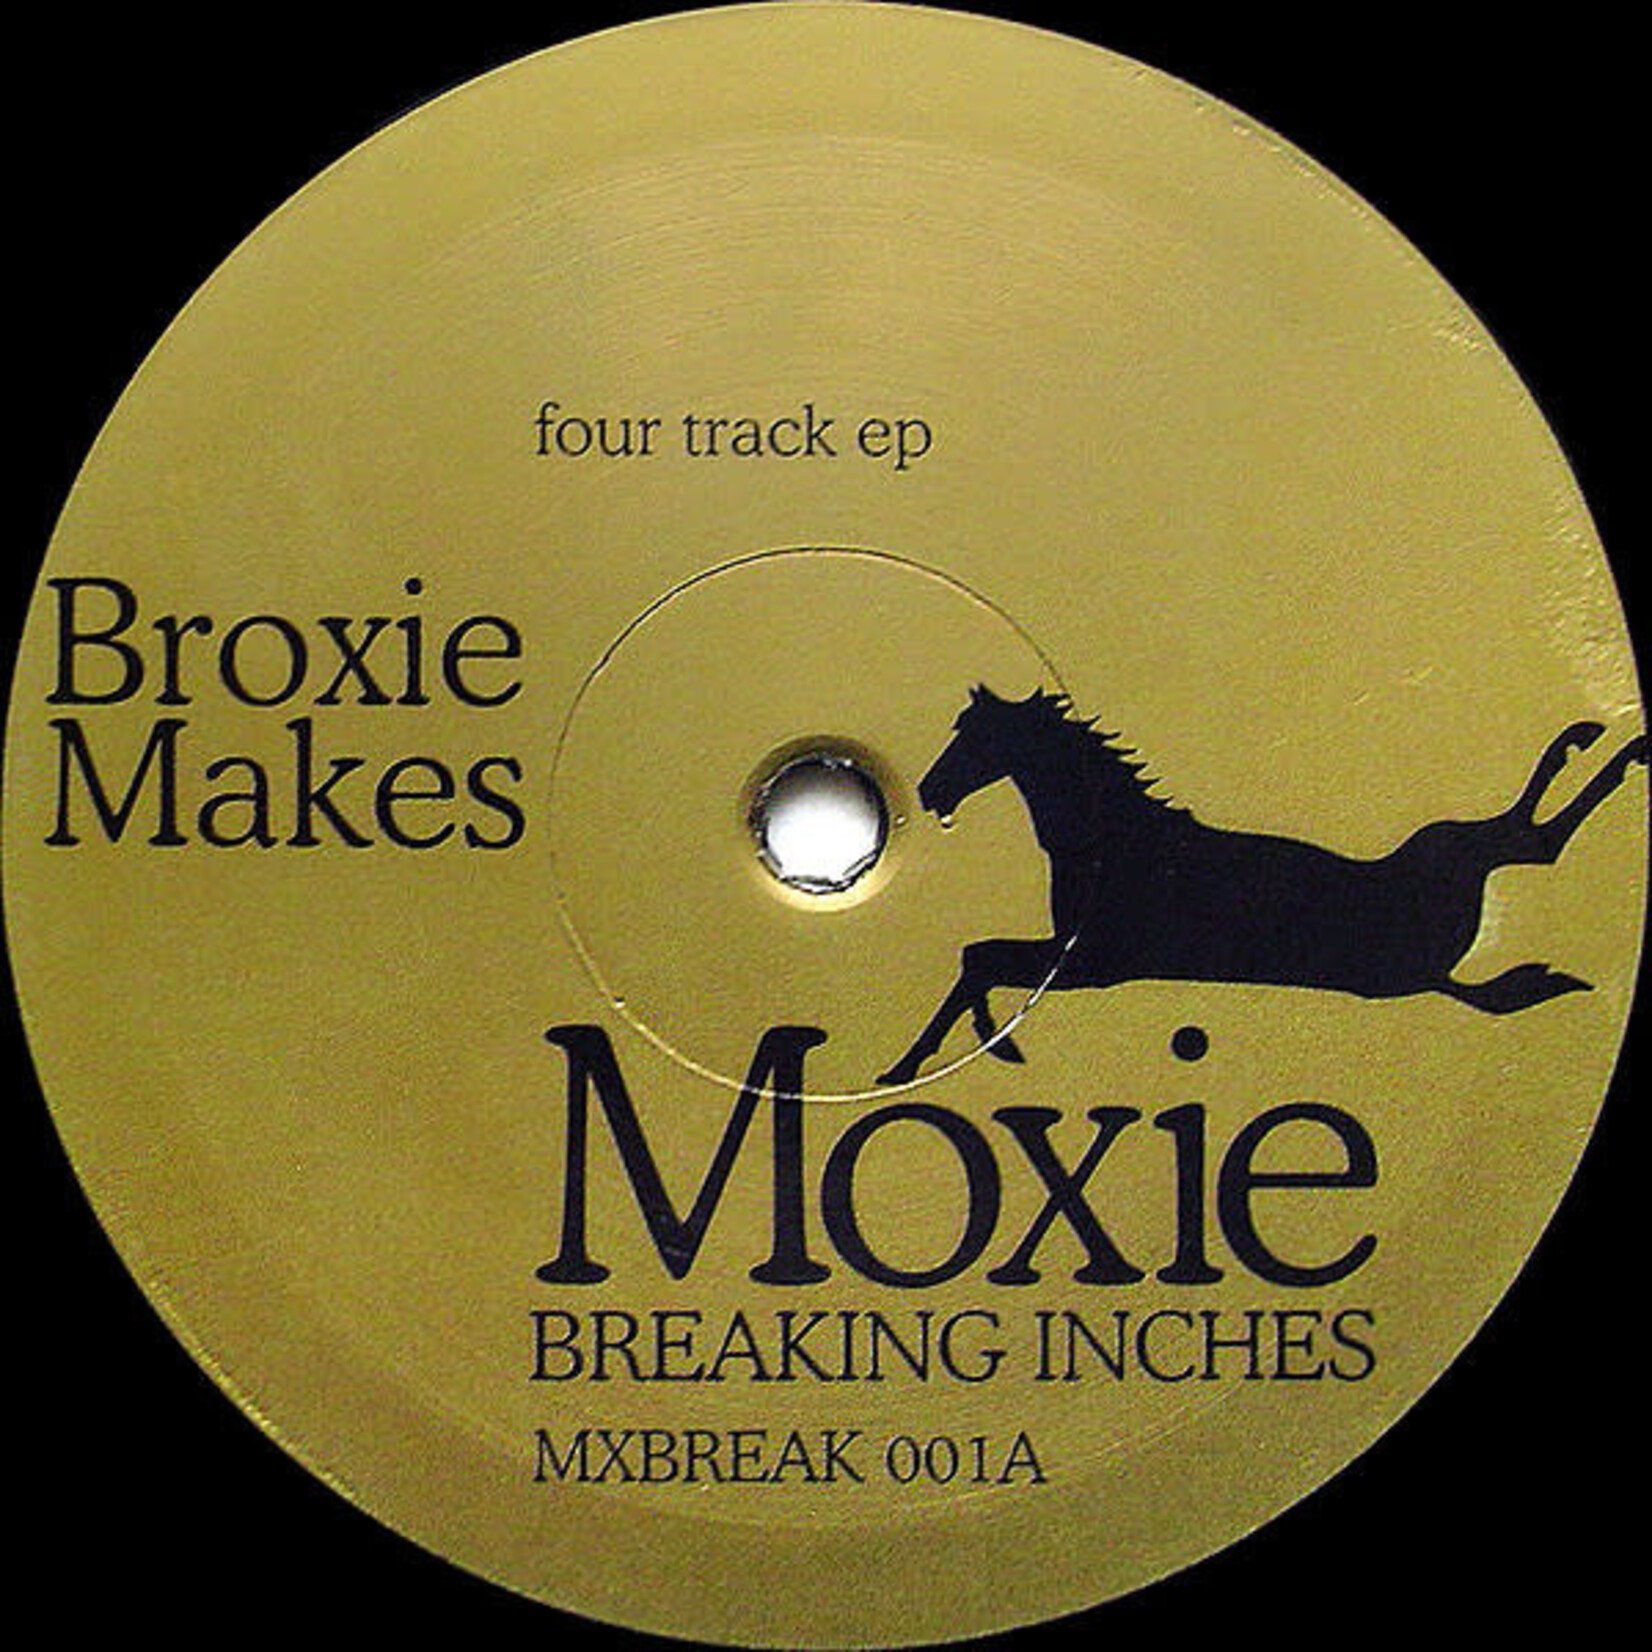 Broxie Makes – Four Track EP